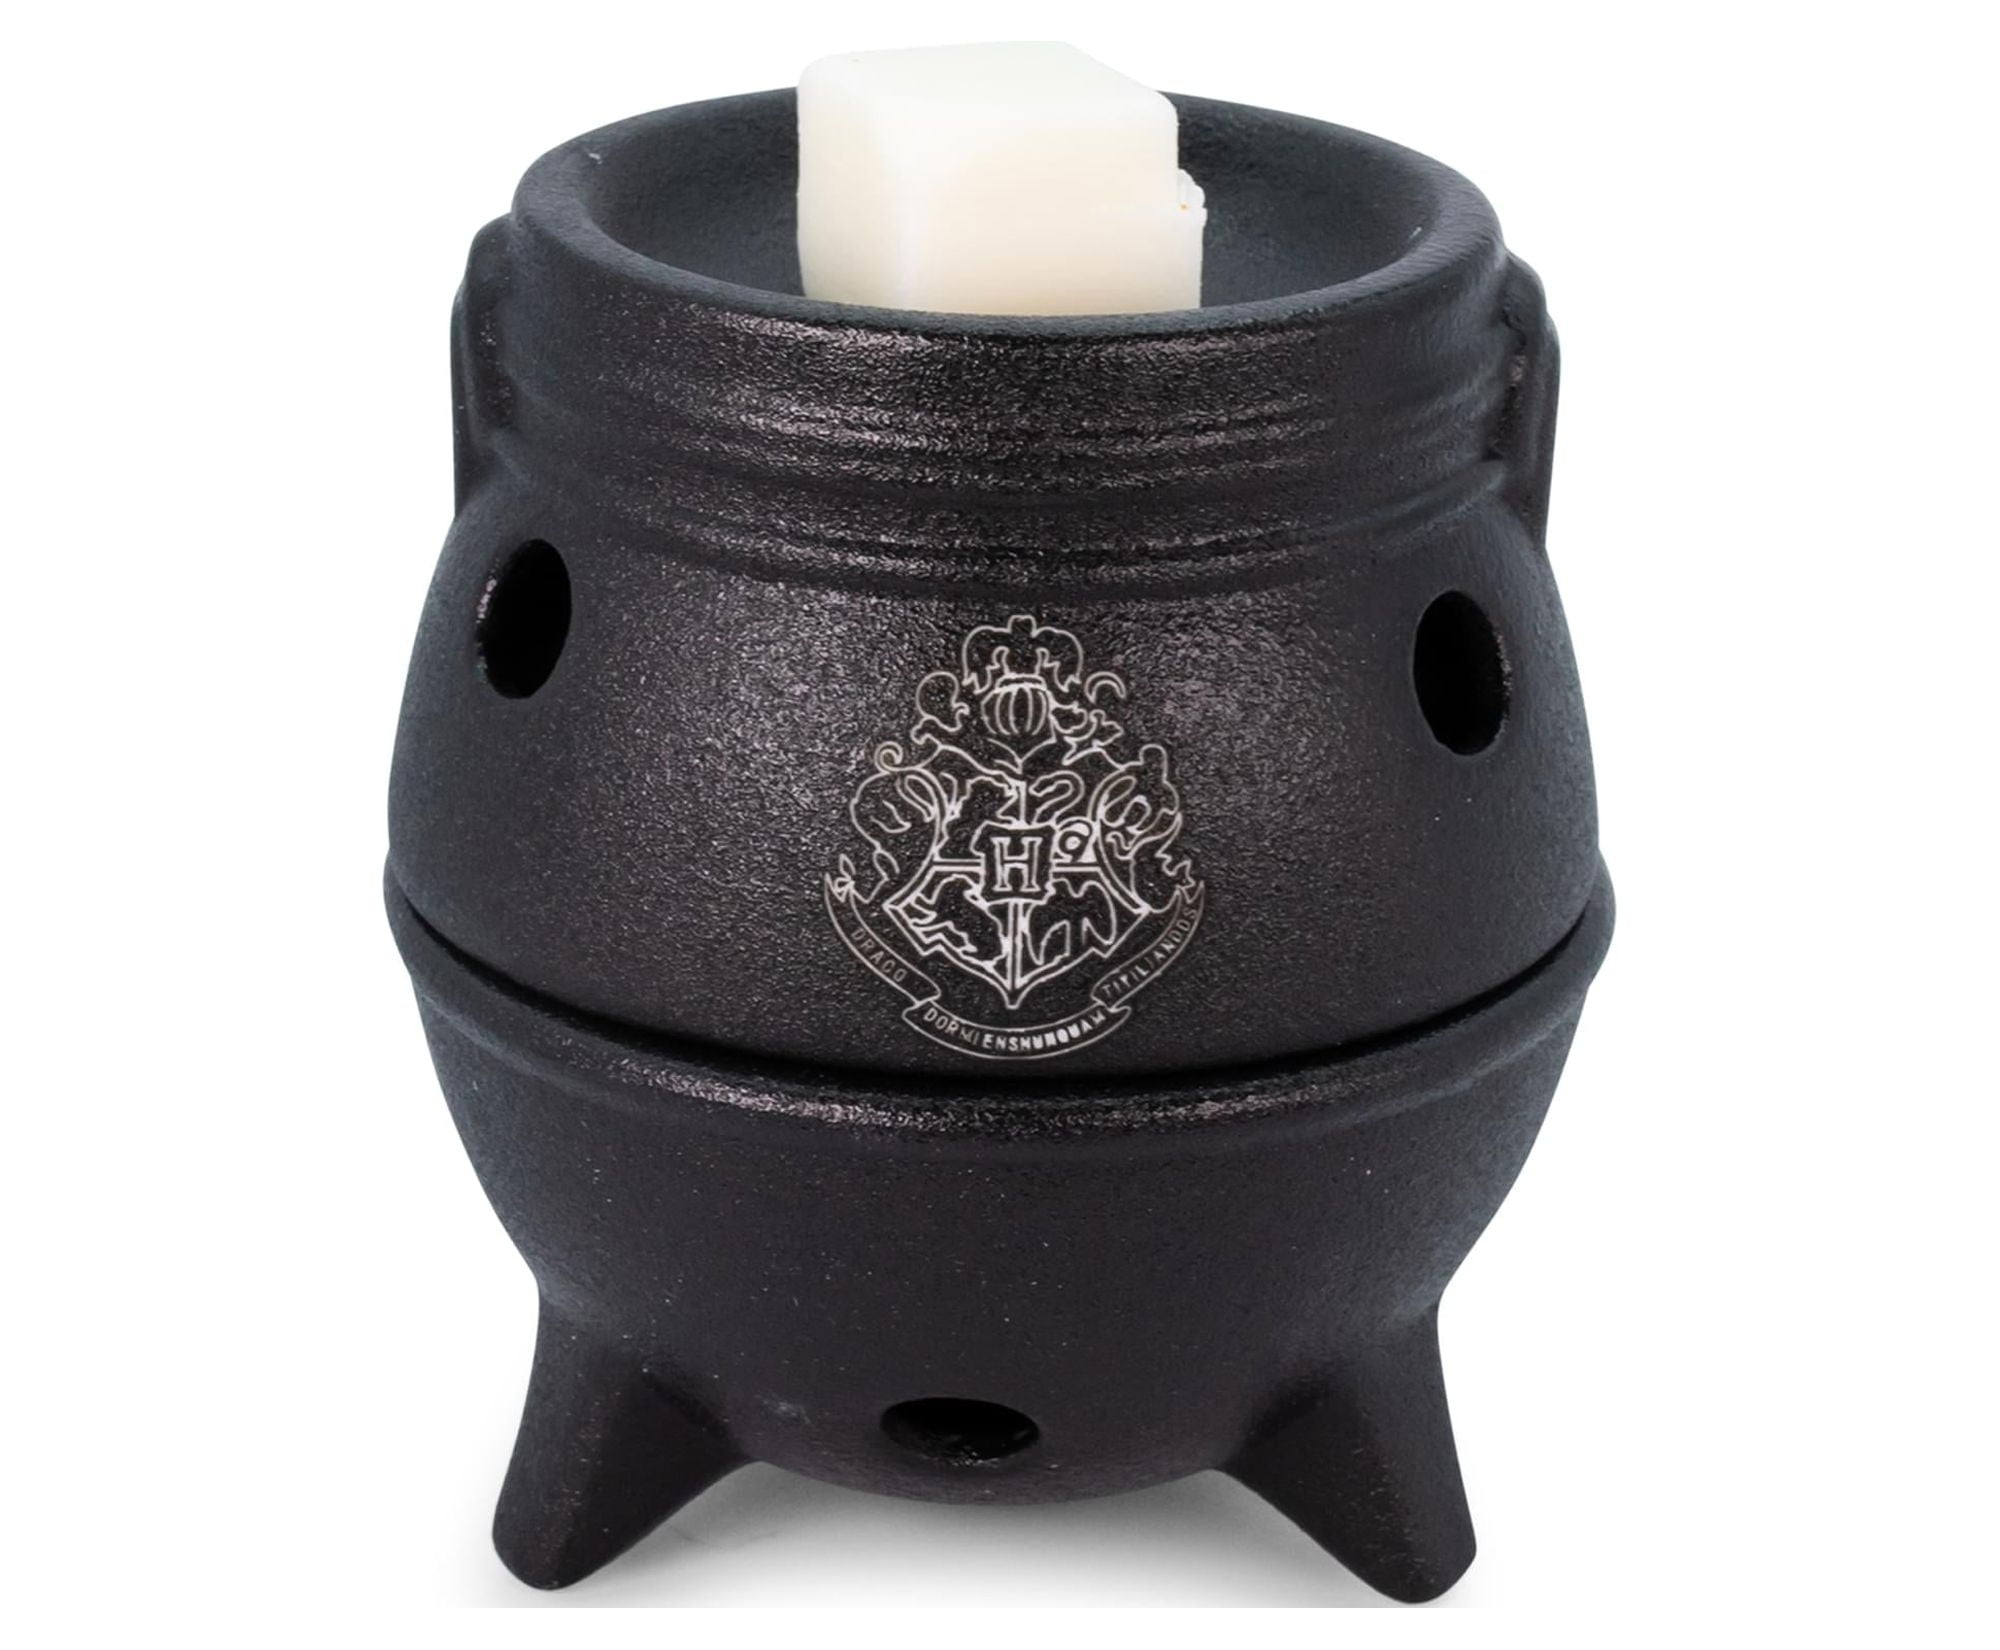 Christmas at Hogwarts Scentsy Warmer, Harry Potter – Shop Now